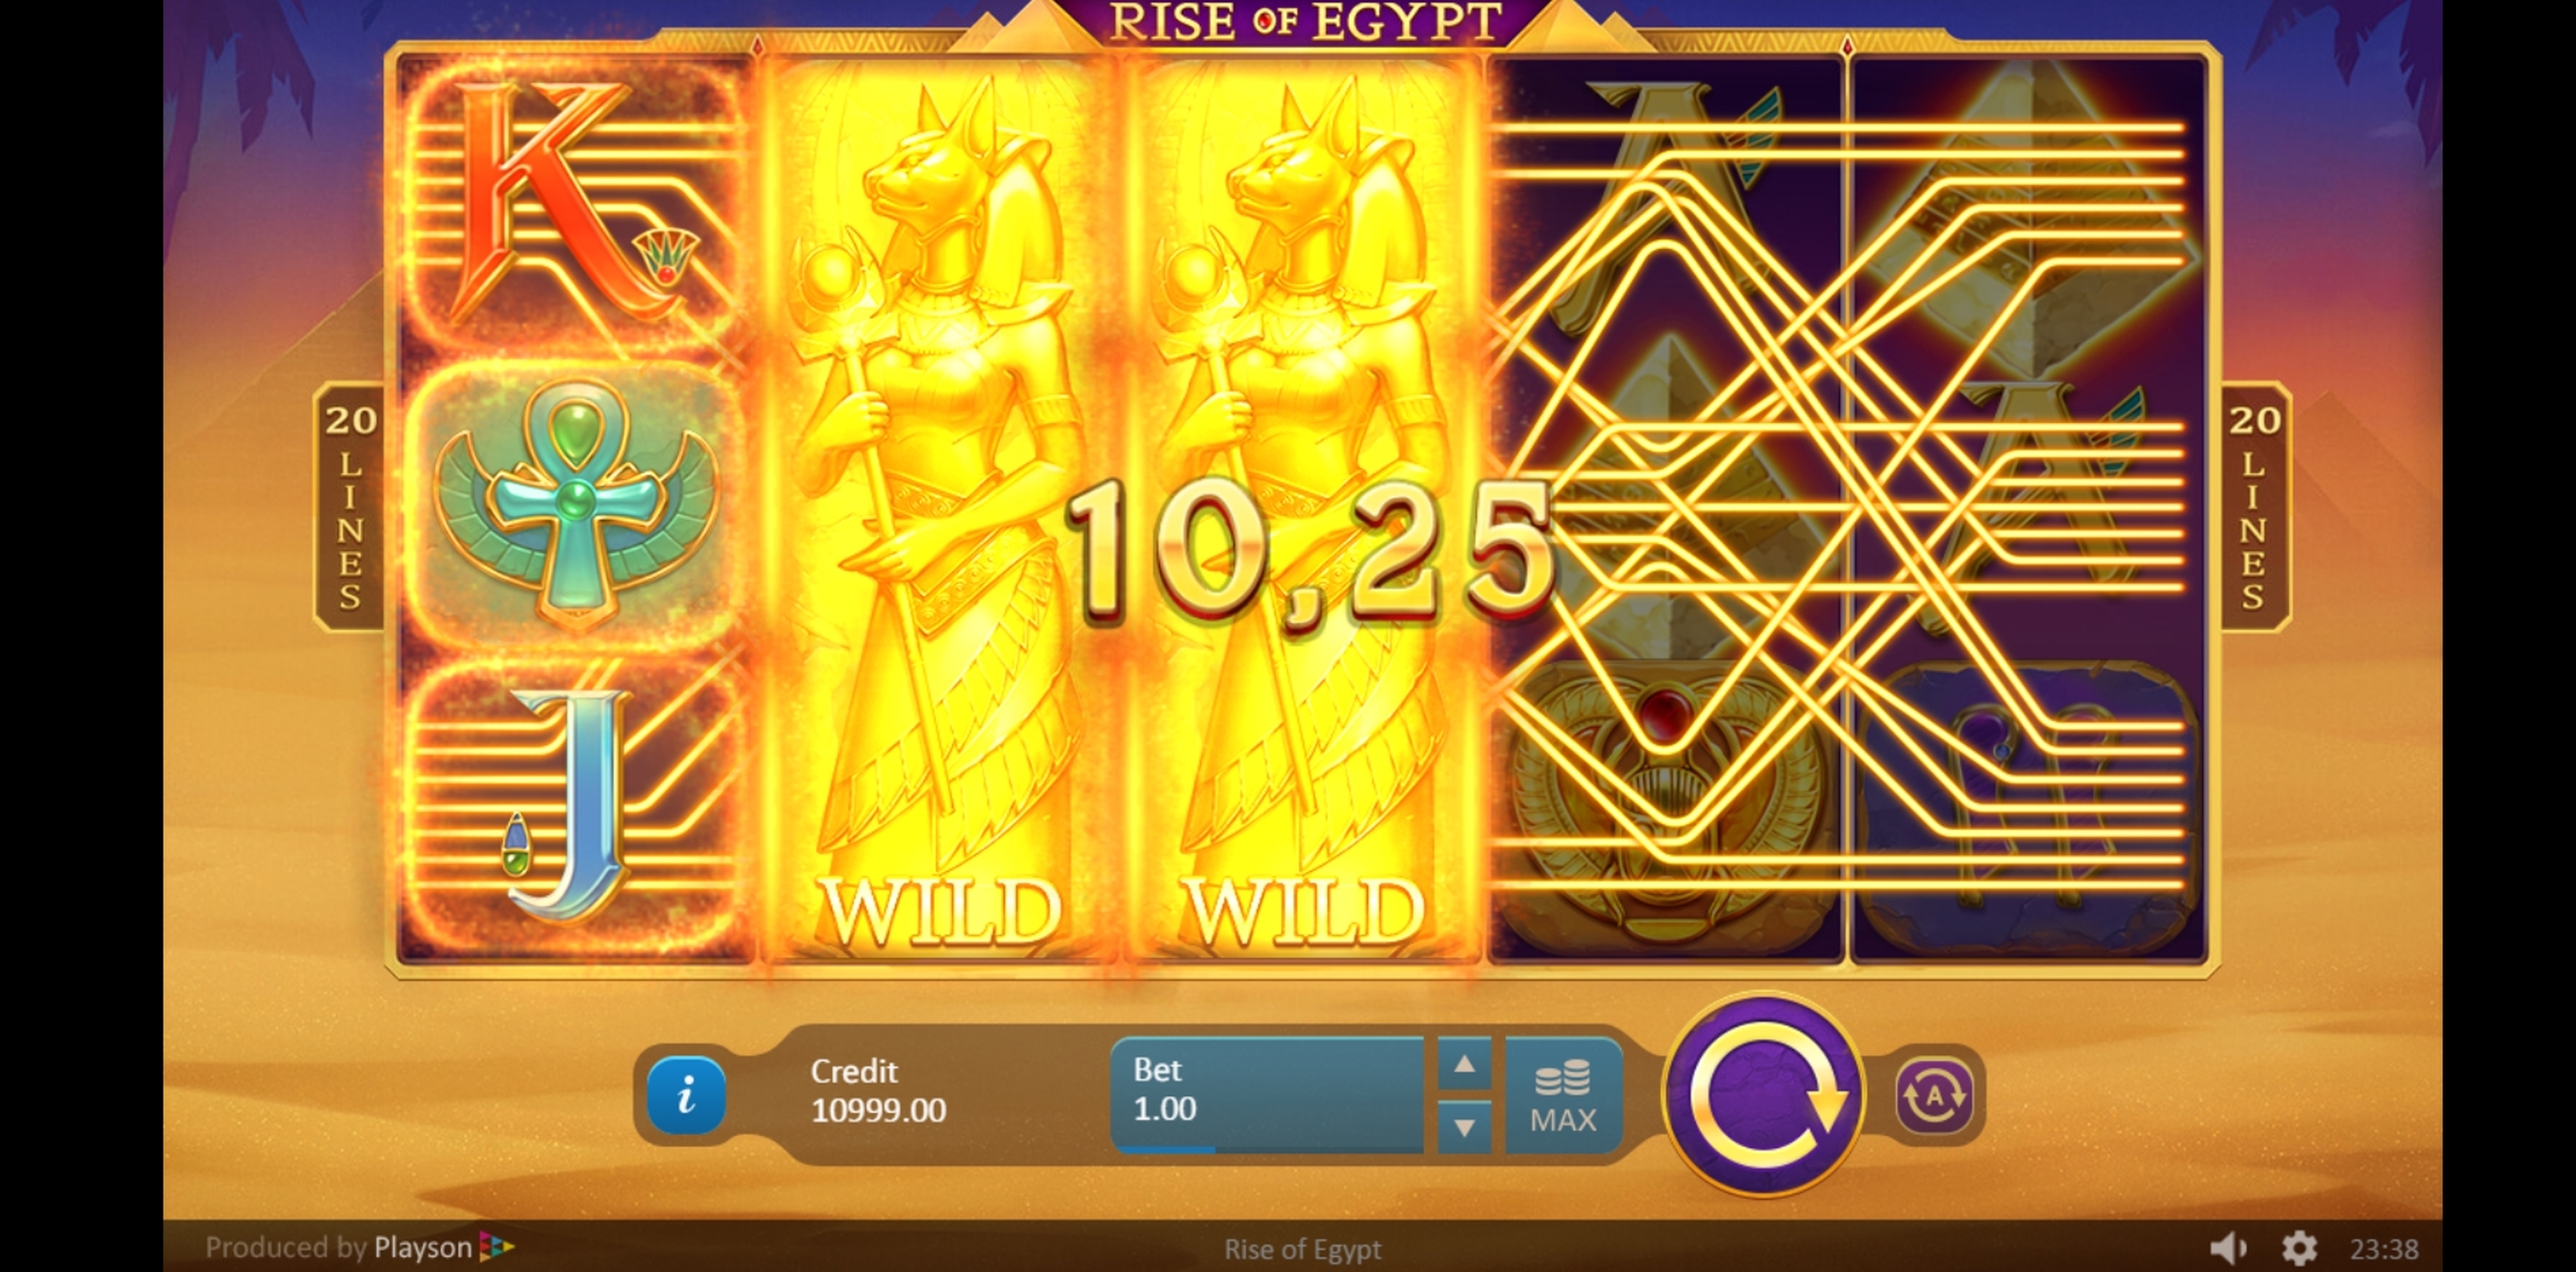 Win Money in Rise of Egypt Free Slot Game by Playson